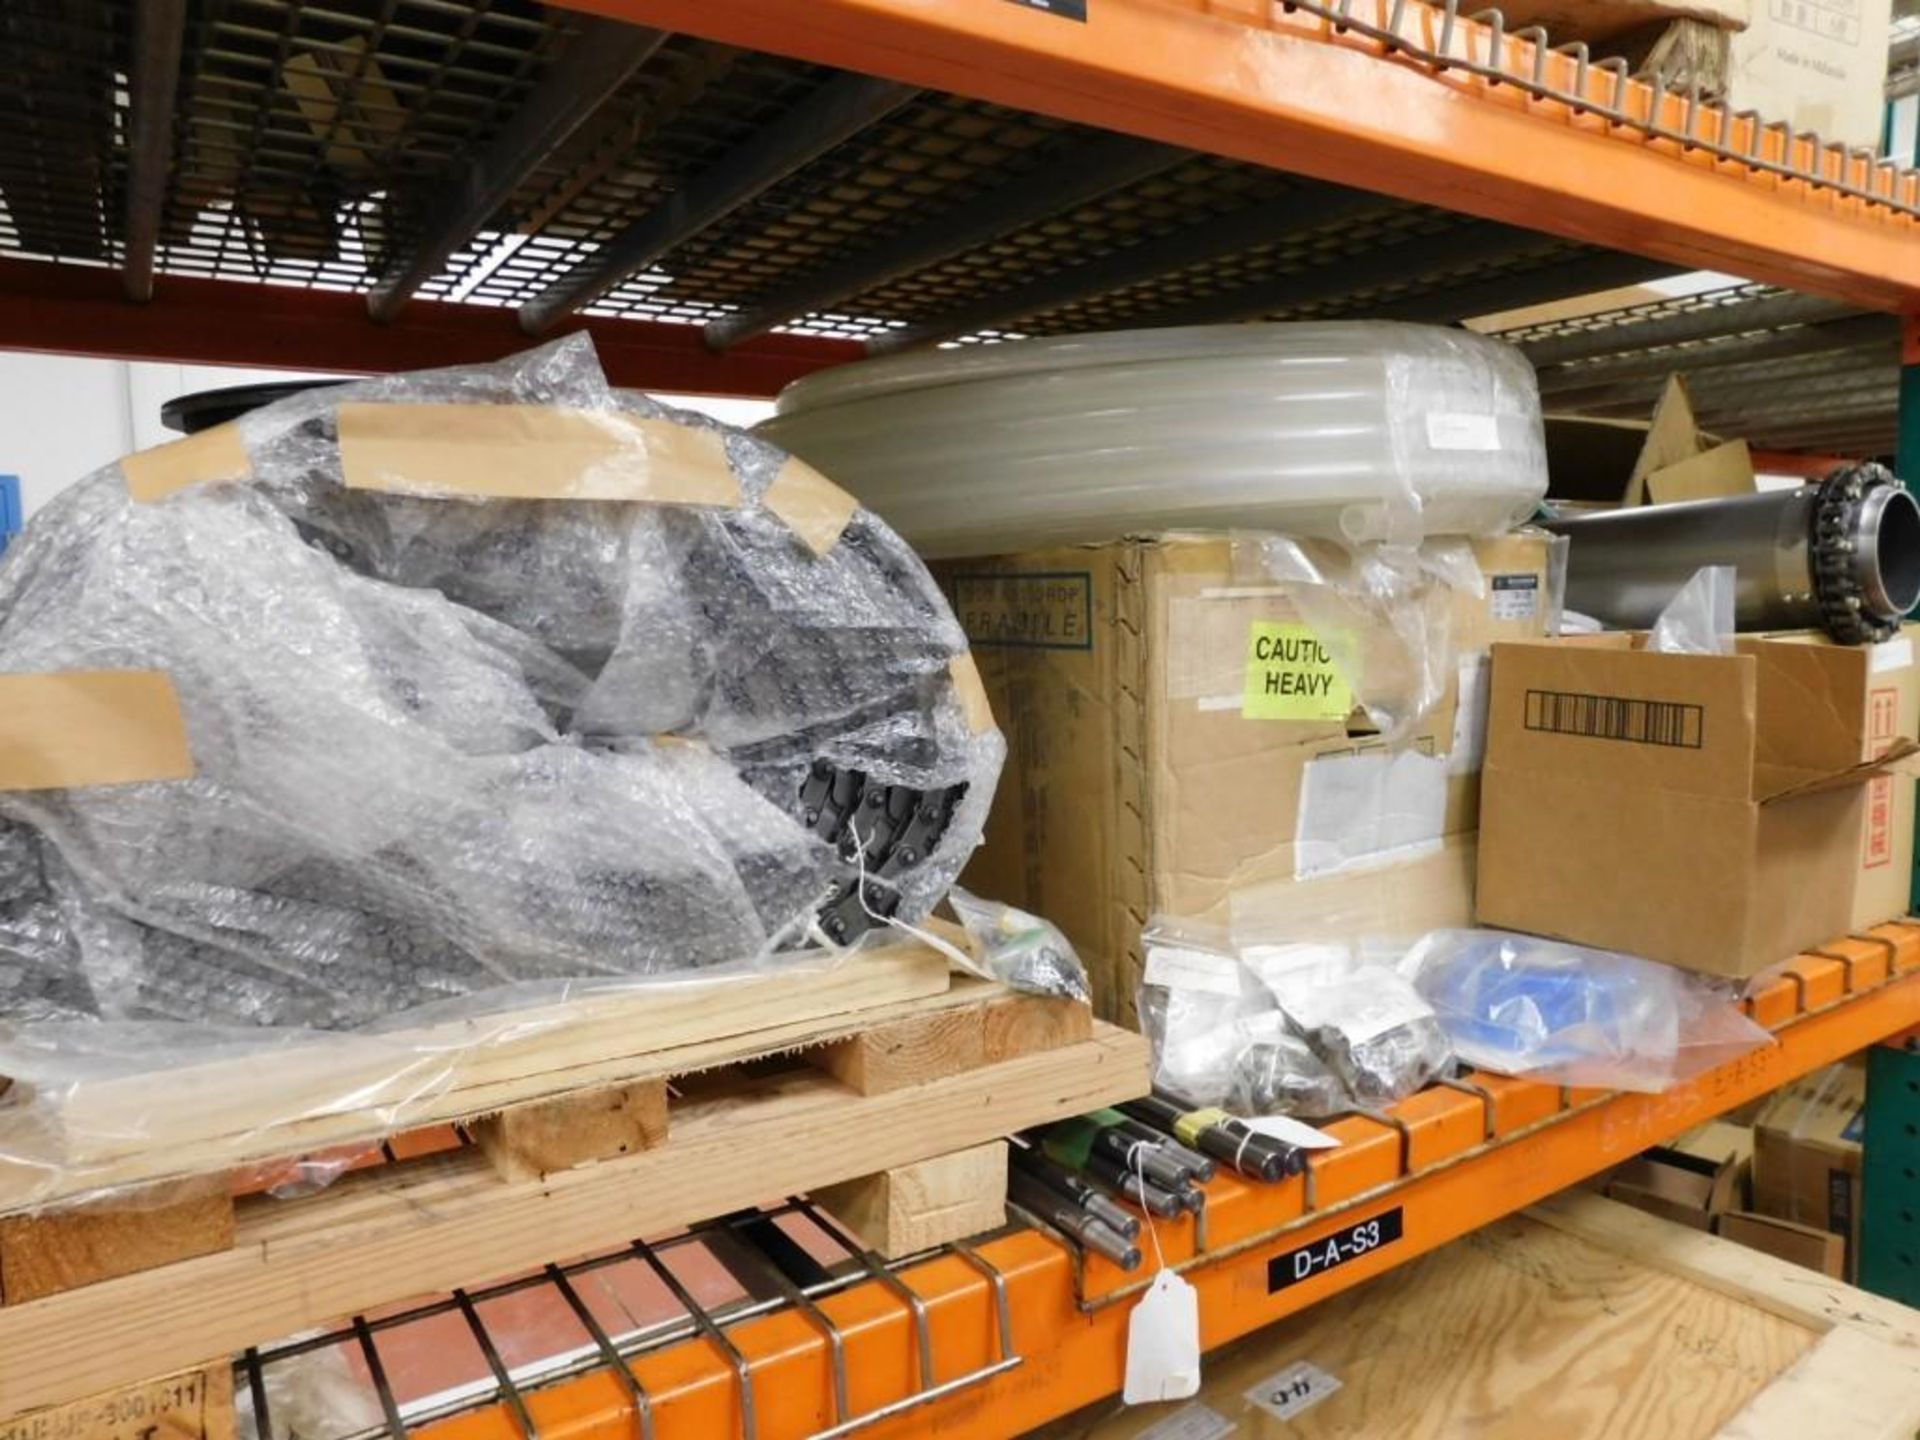 Contents Of Pallet Racking - Image 18 of 23